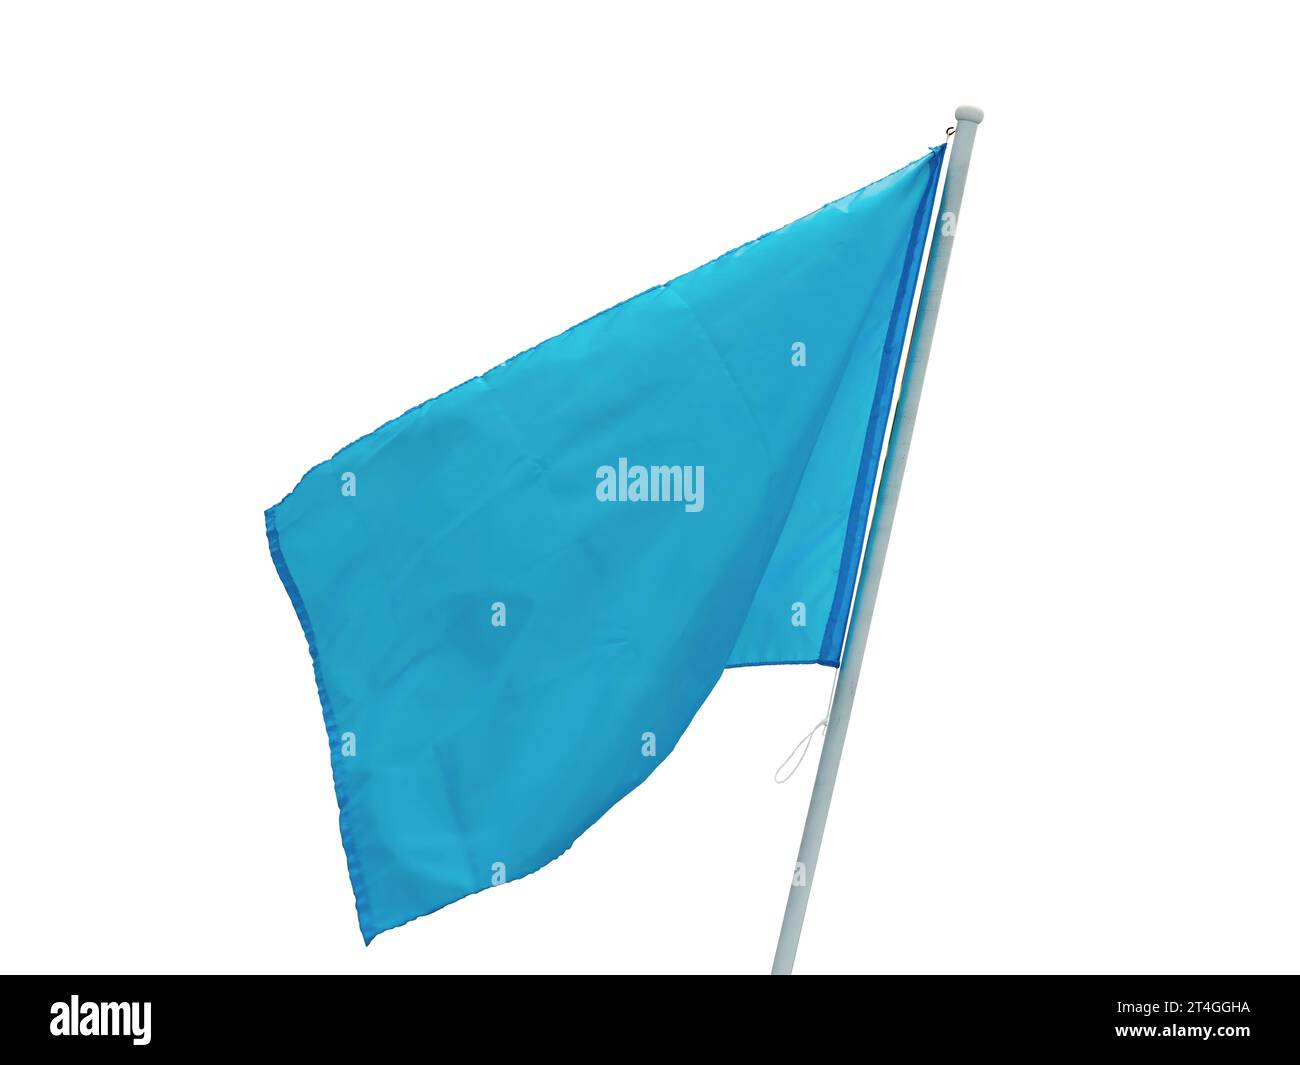 Blue Blank Flag Template Isolated on a White Background Stock Photo